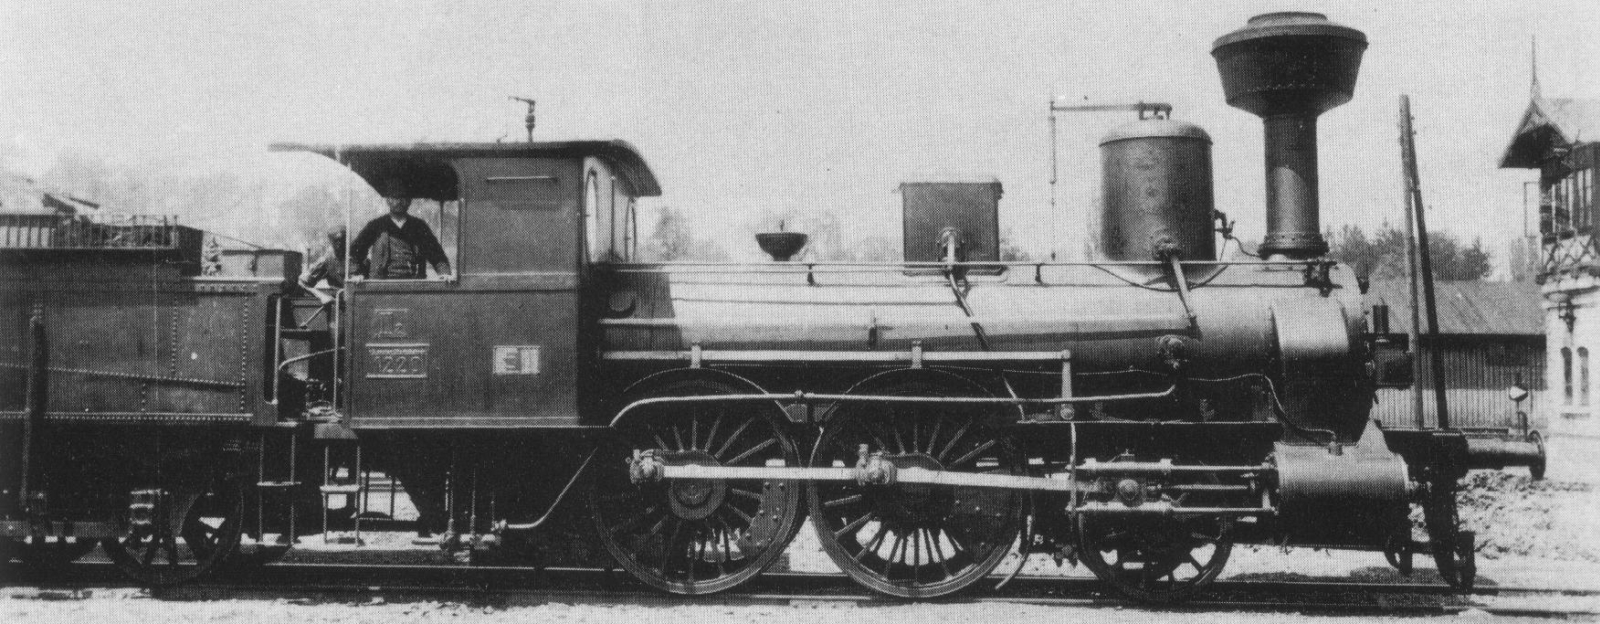 KEB I as kkStB 12.20 with driver's cab and Kobel chimney